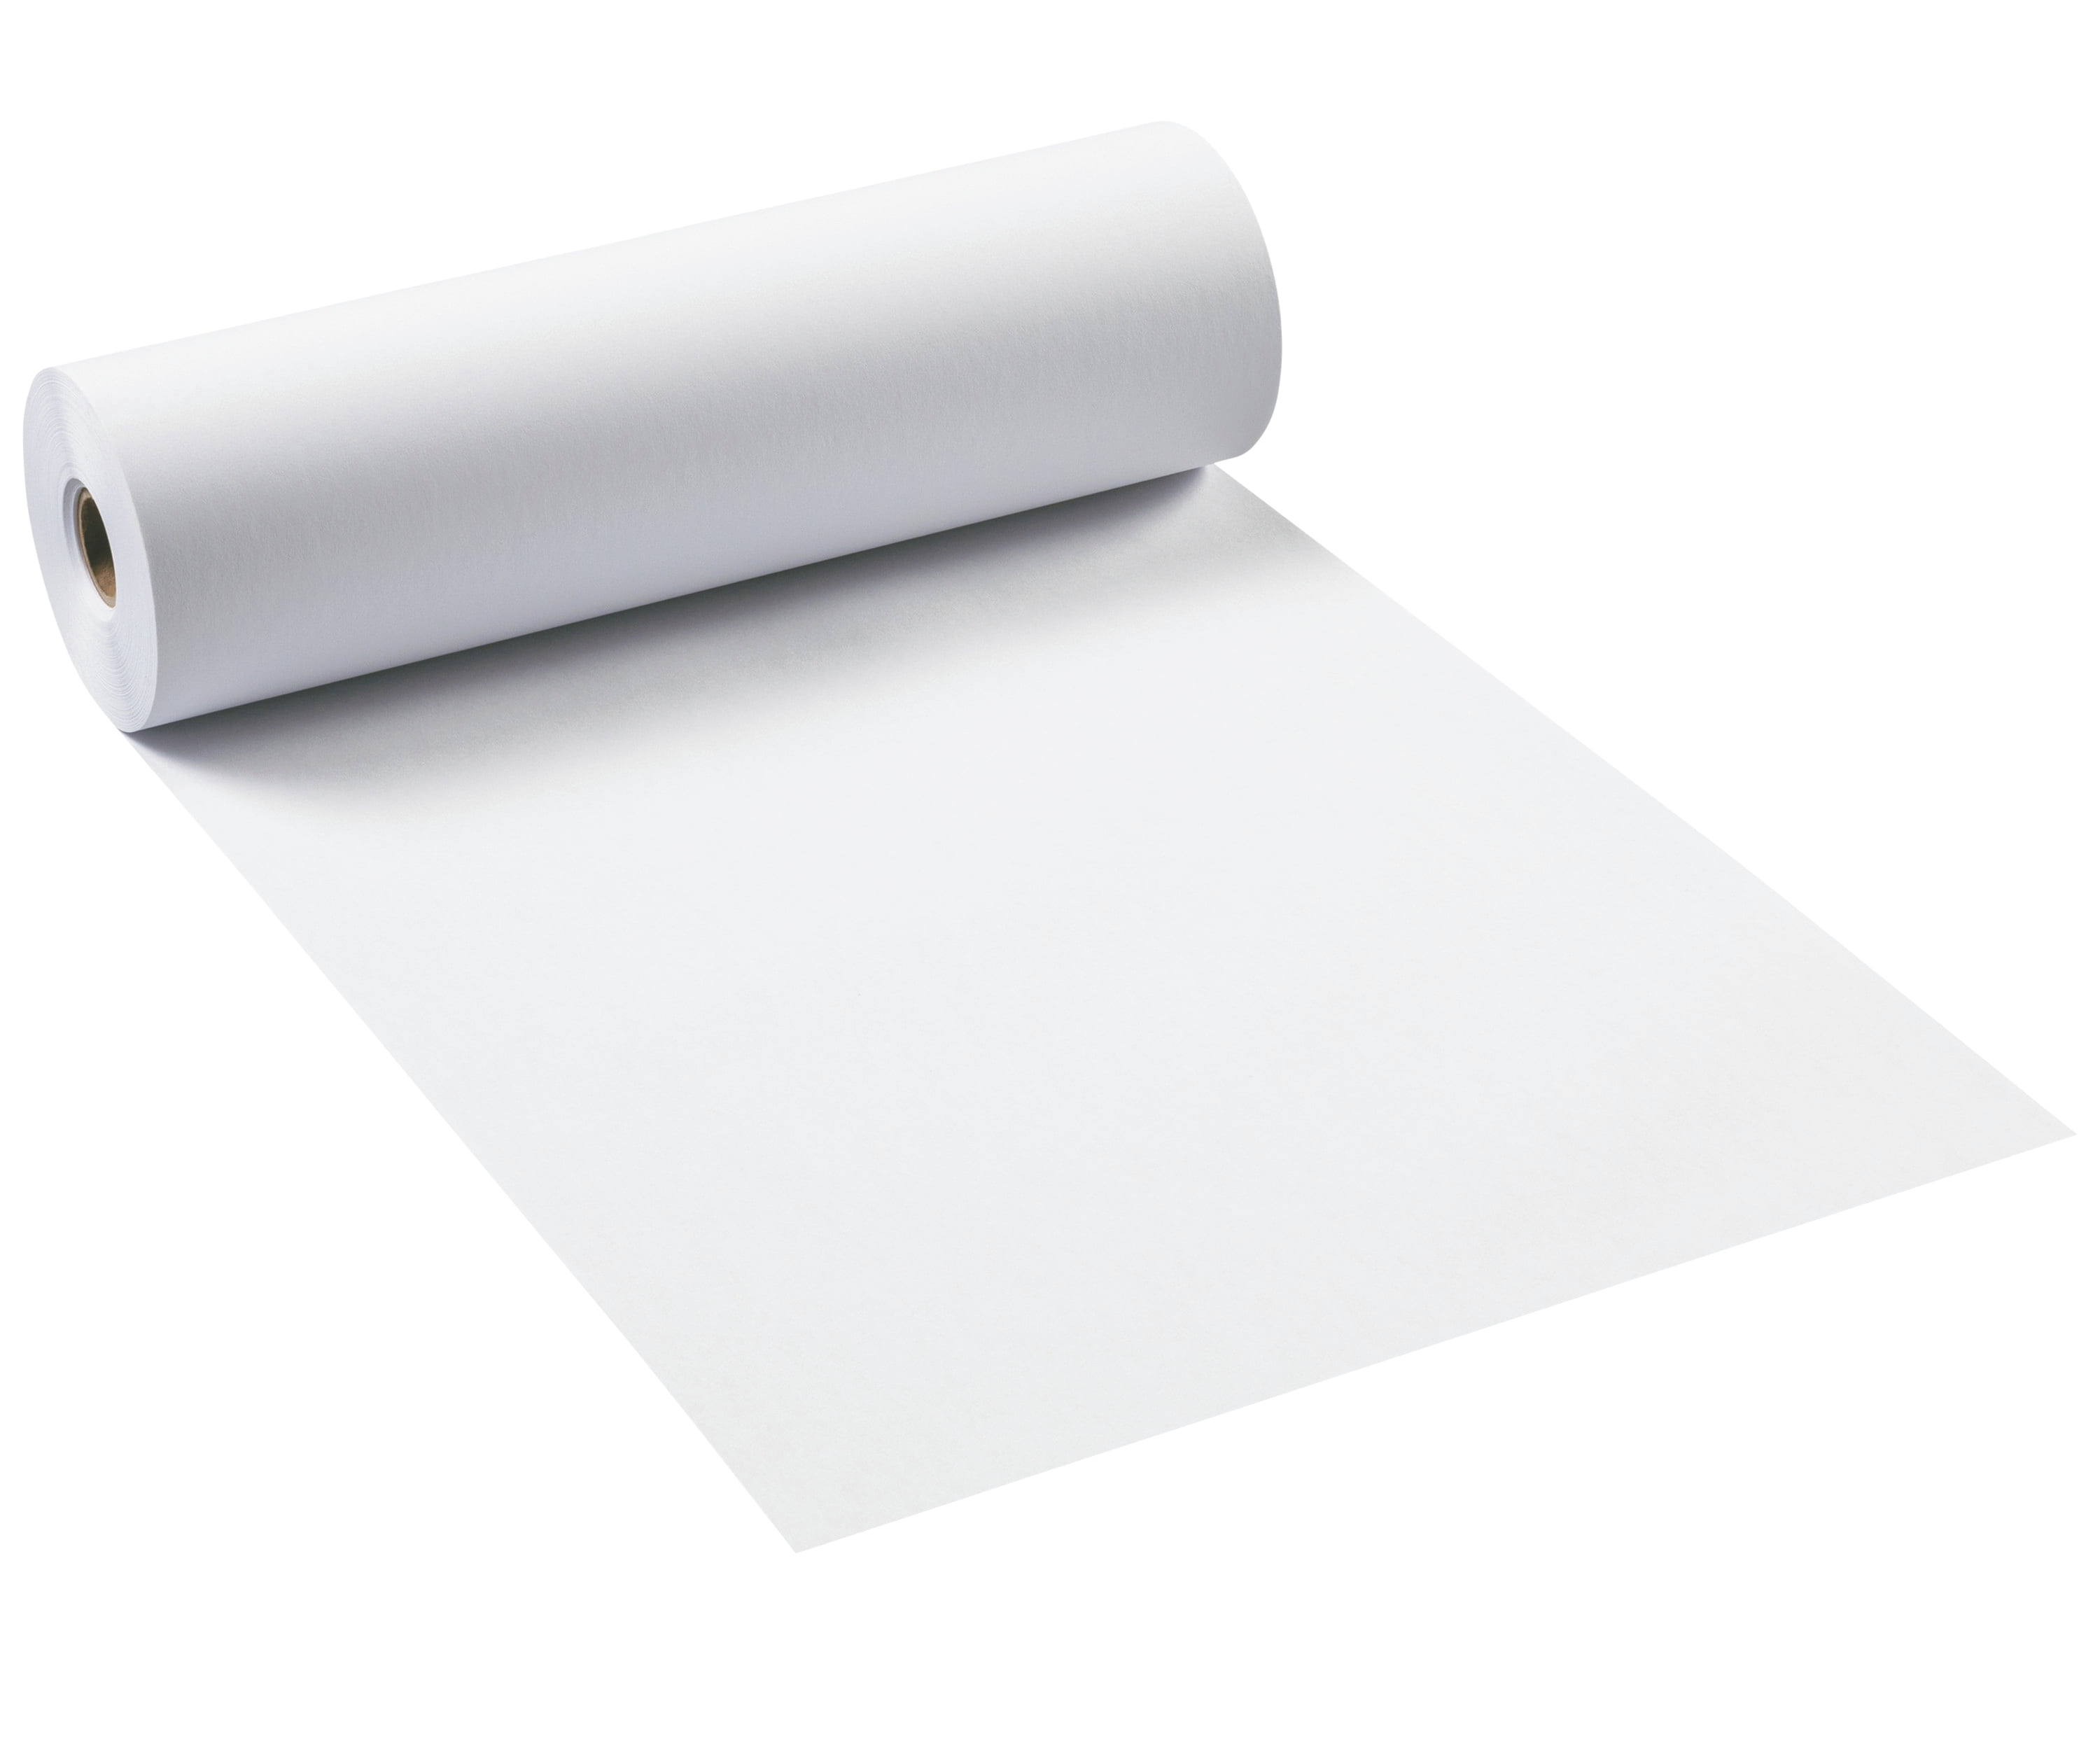 Pacon 4765 24 x 200' White 35# Easel Paper Roll